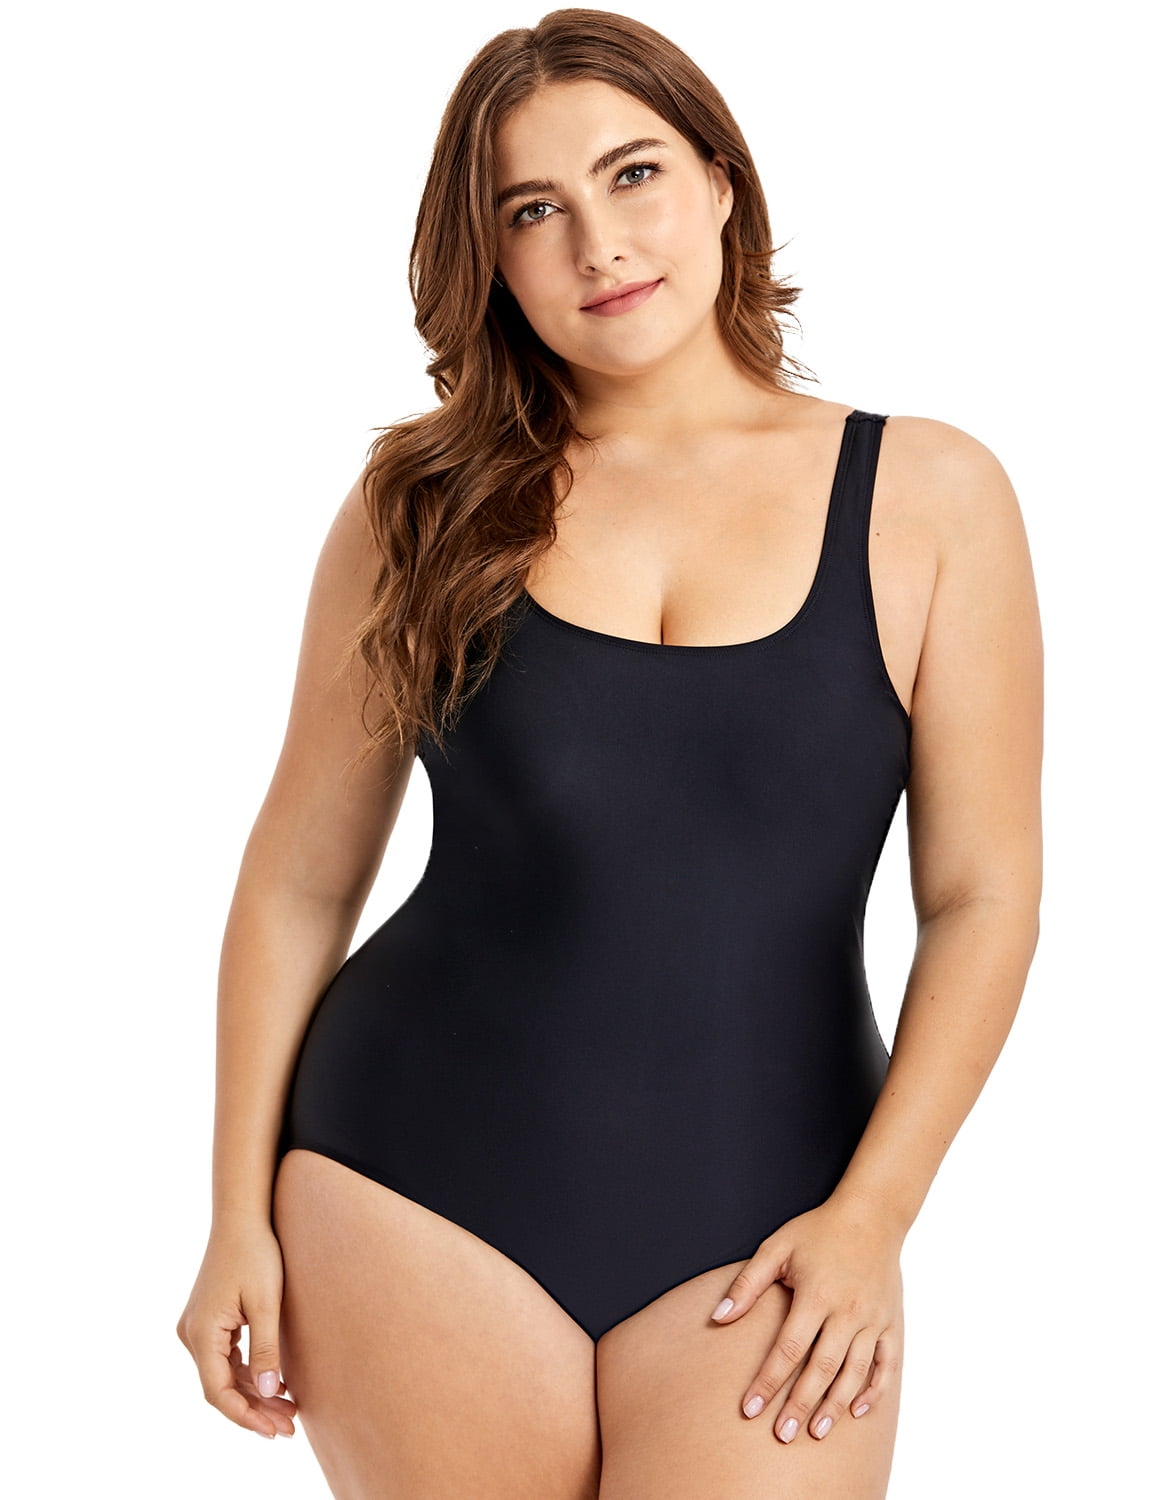 DELIMIRA Women's Plus Size Built in One Piece Skirted Swimsuit Bathing Suit